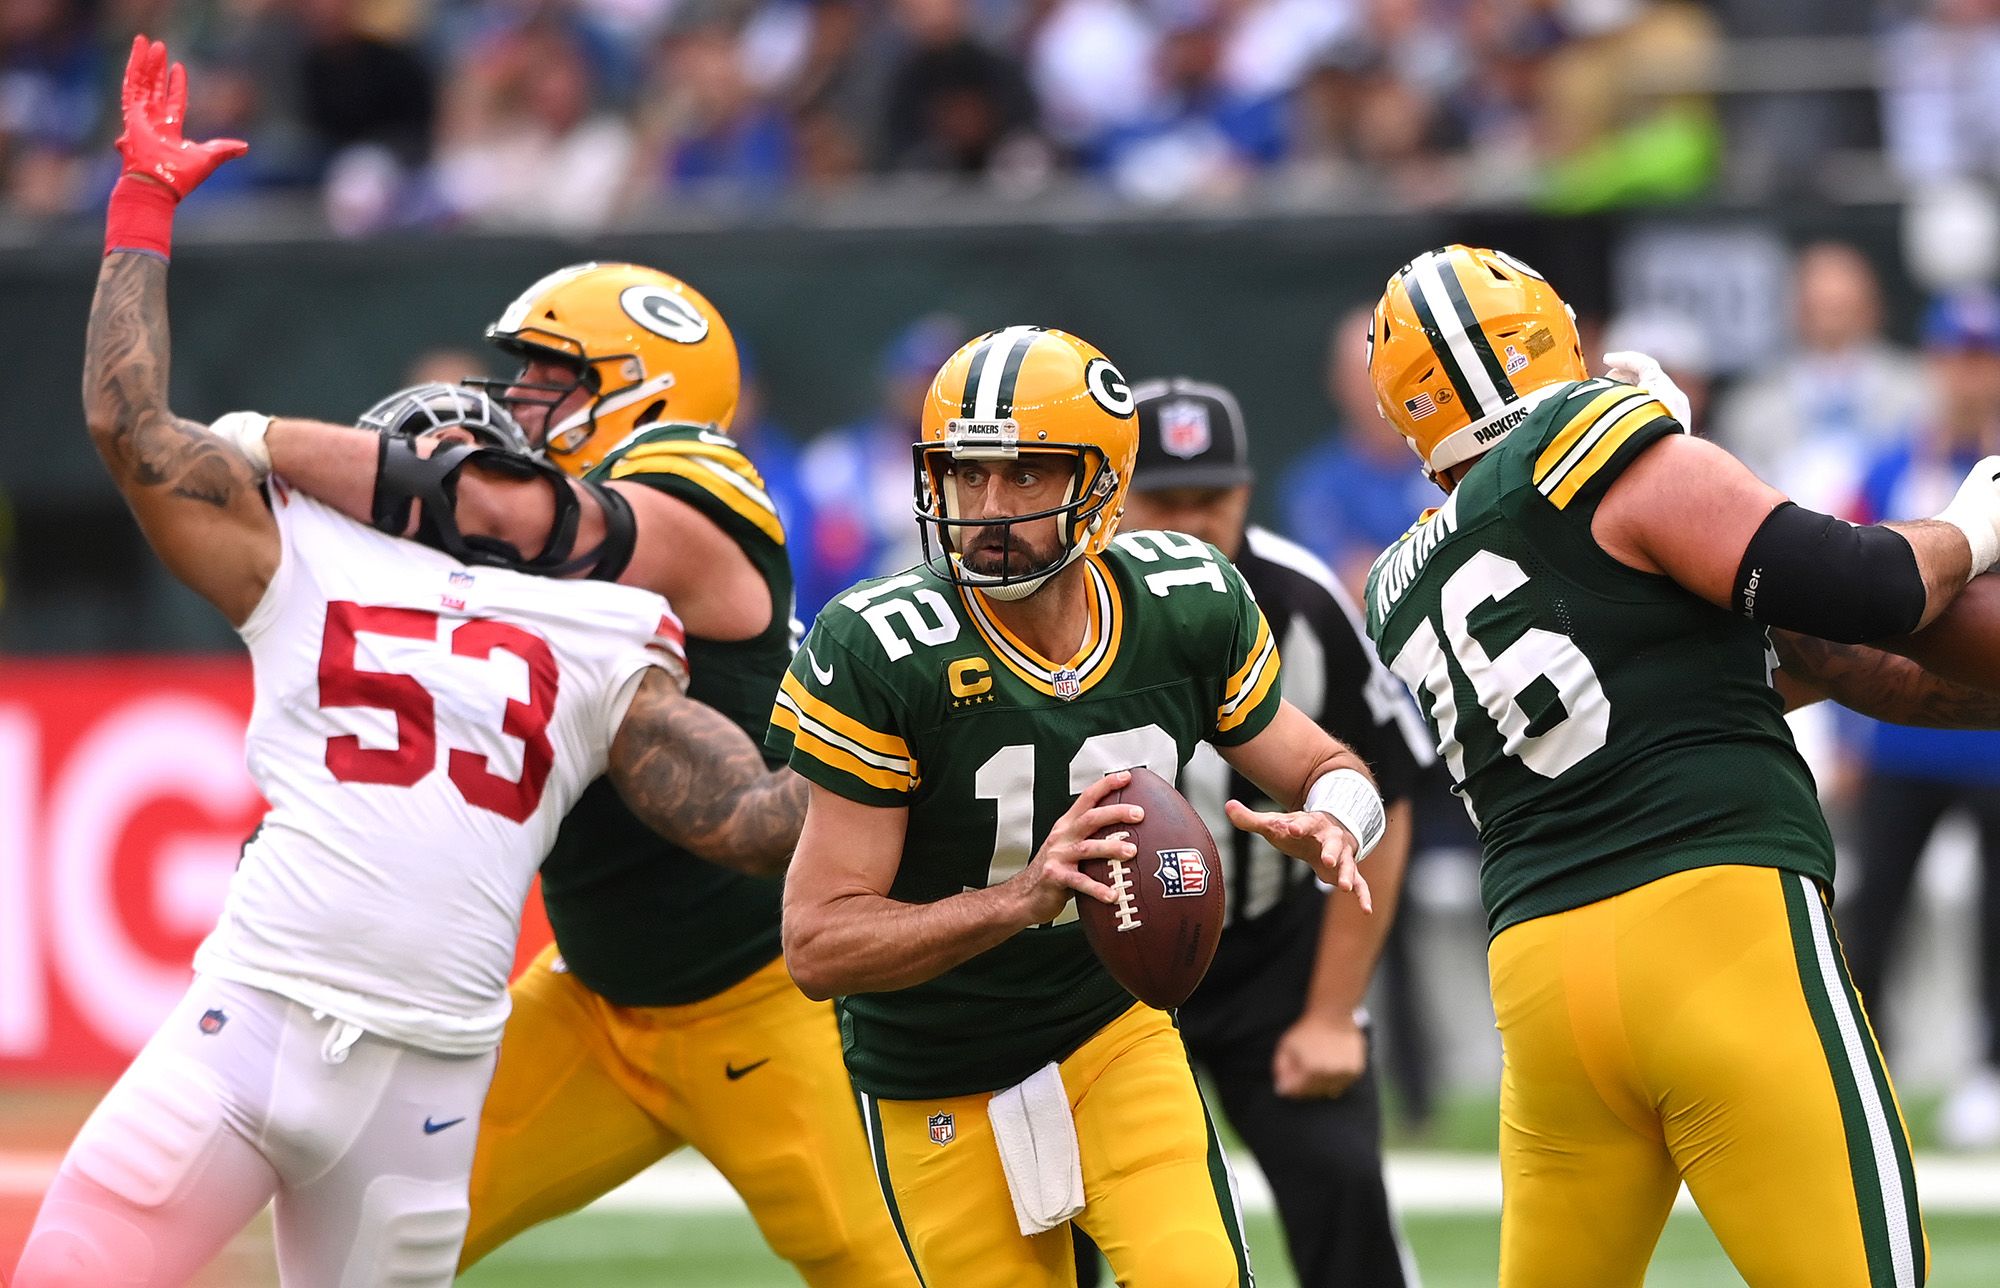 2022 NFL combine preview and Aaron Rodgers's options - Sports